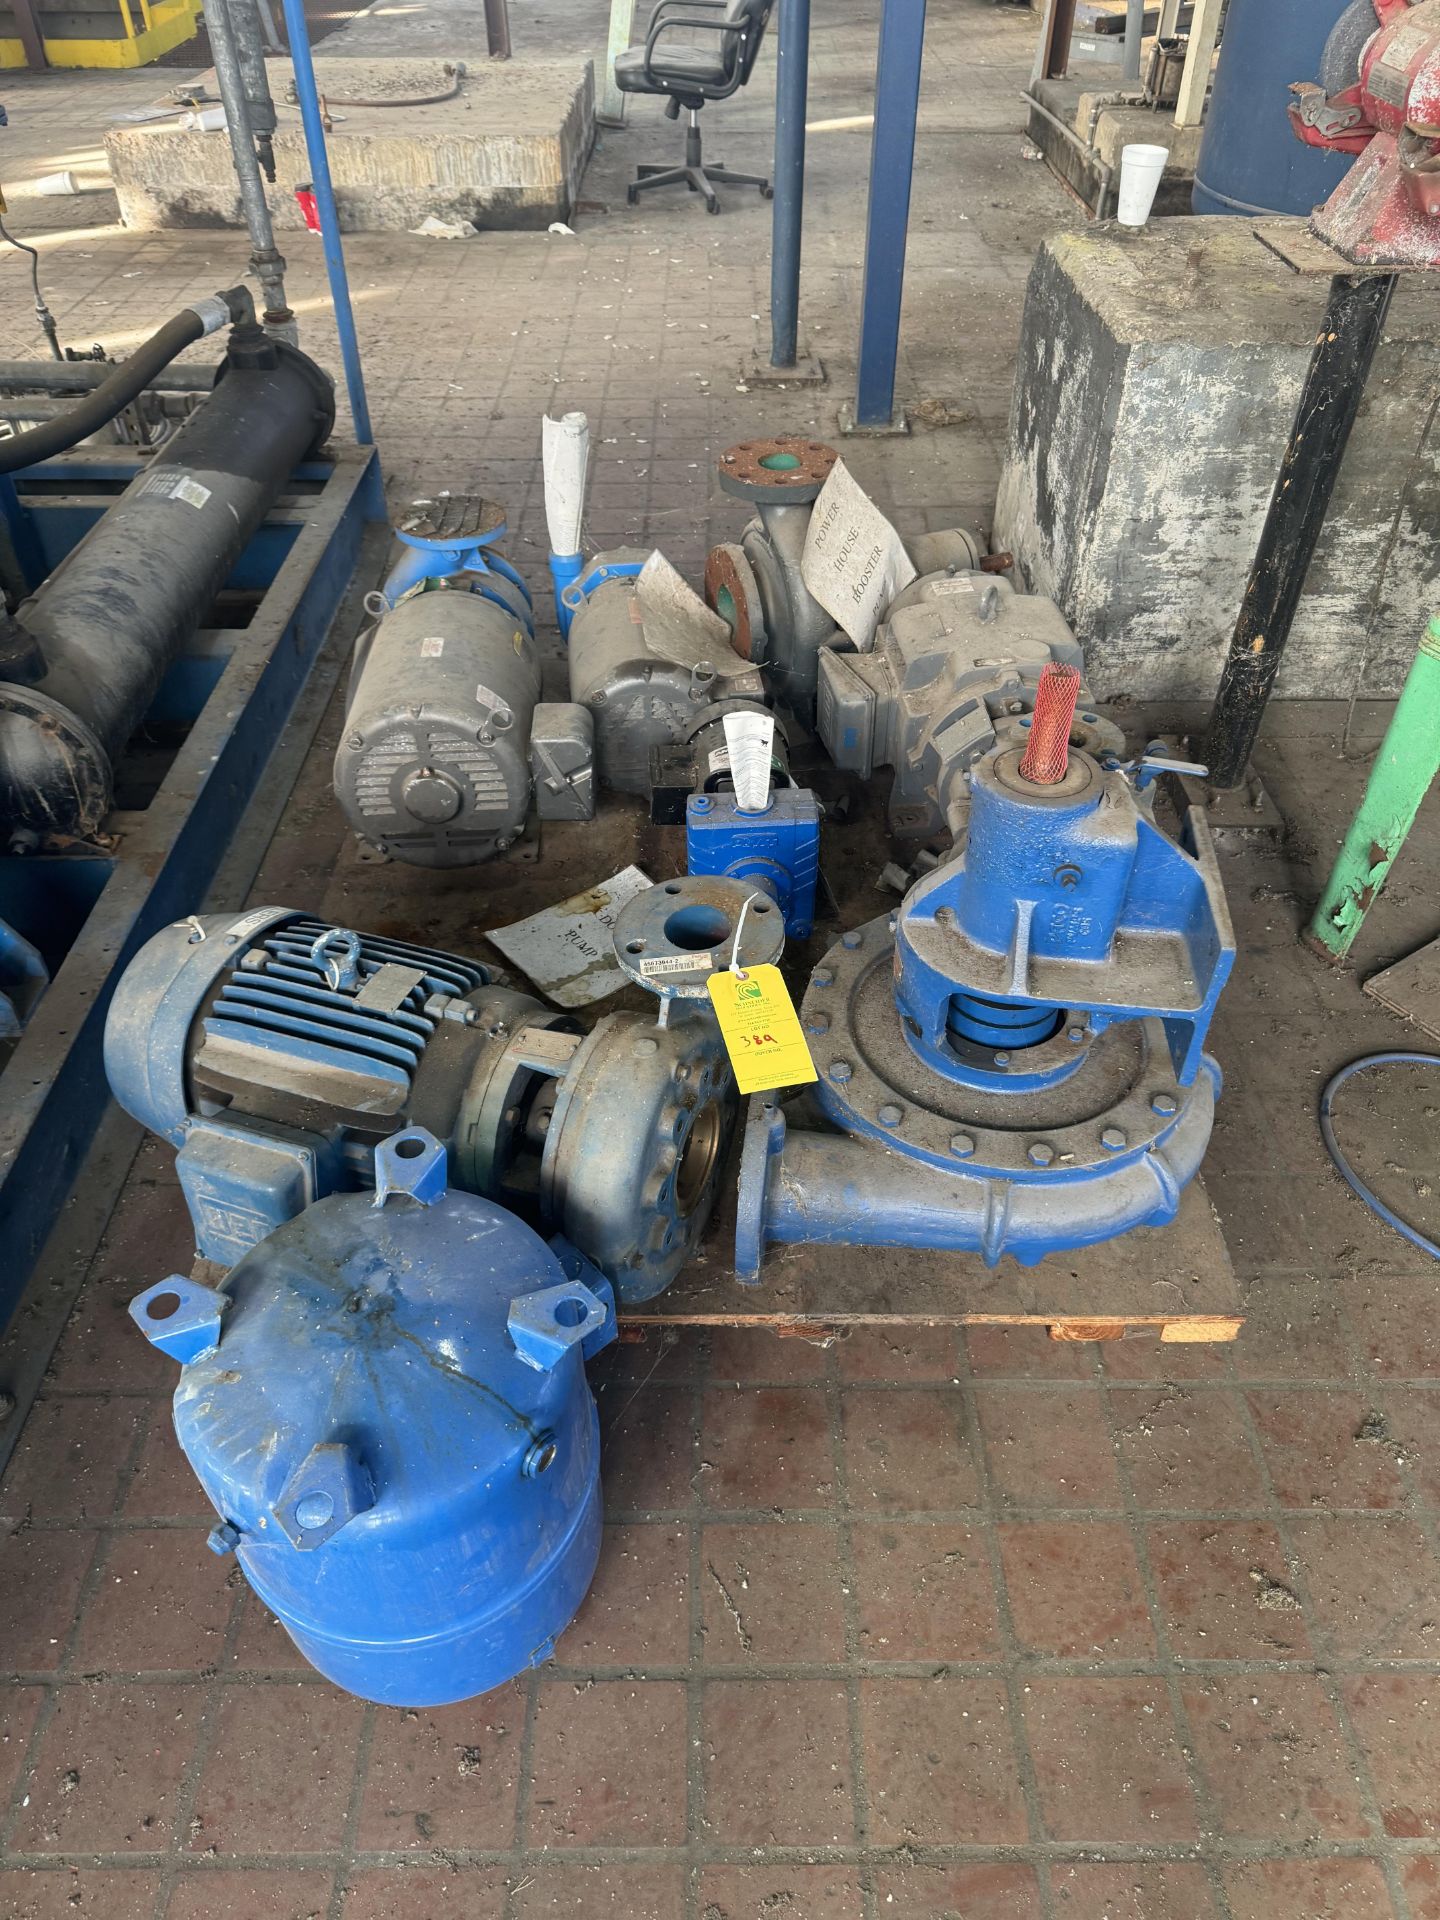 Pallet of Miscellaneous Motors and Pumps, Rigging/ Removal Fee - $75